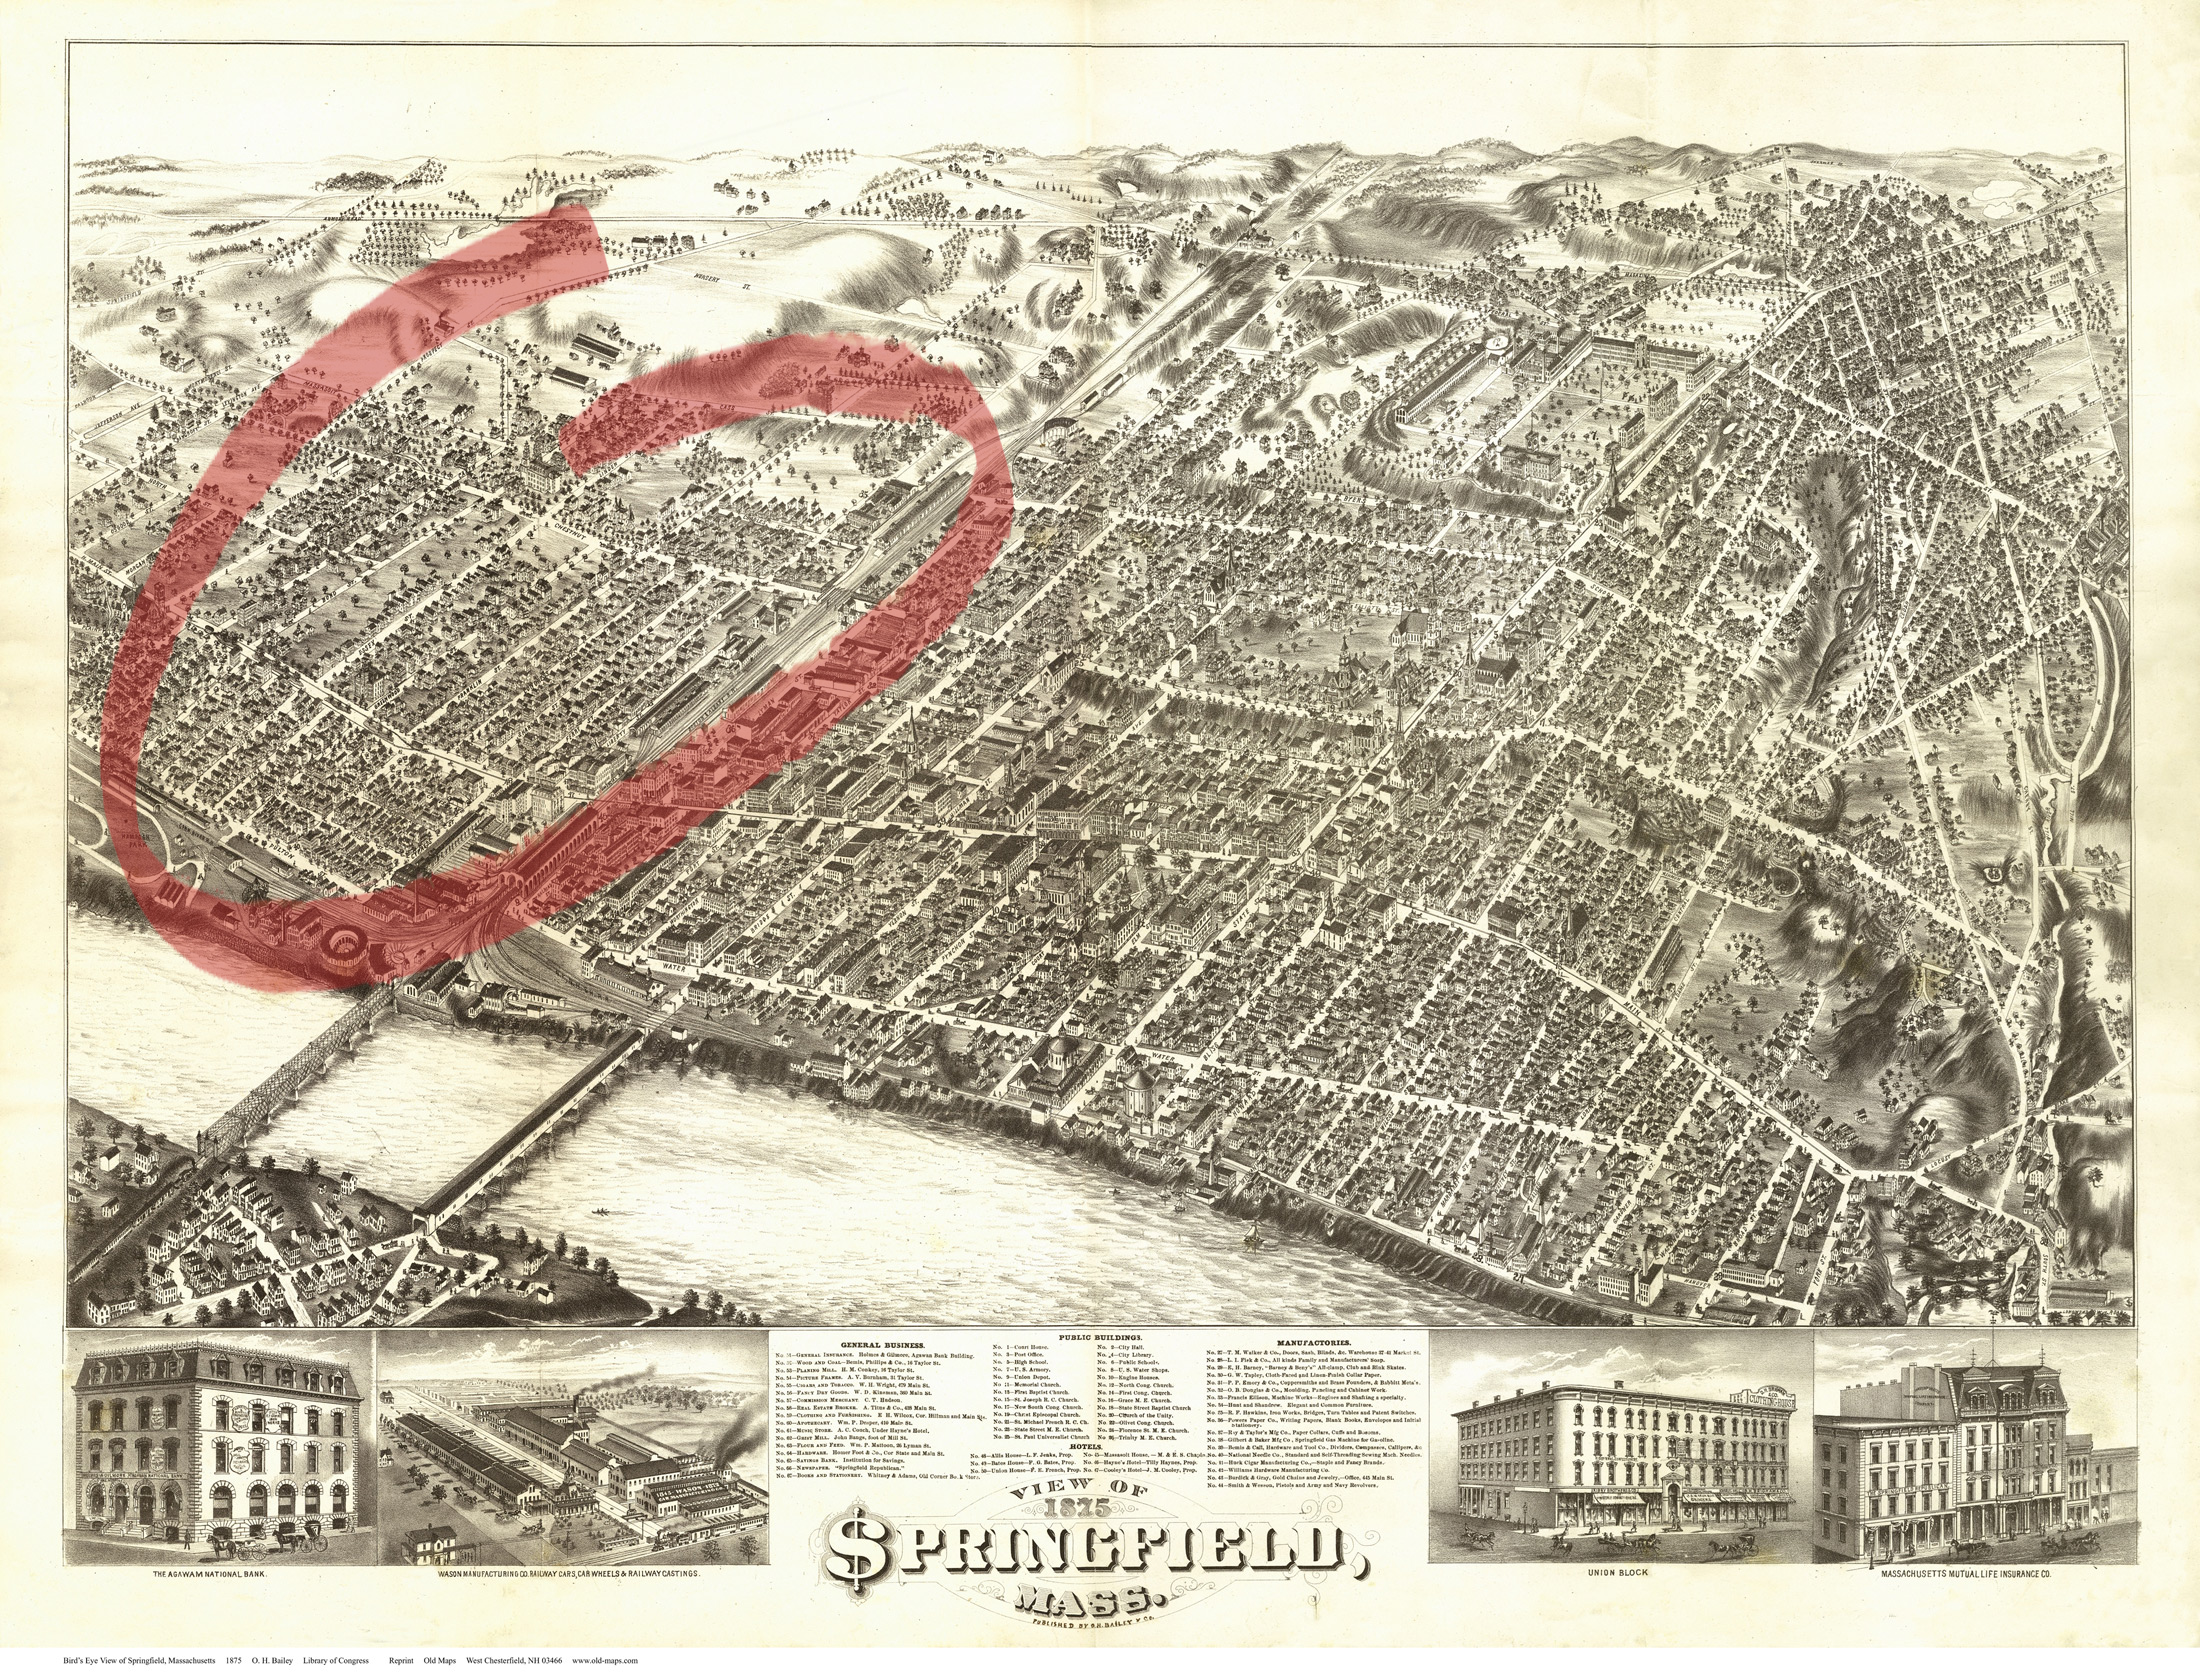 1875 Map of Springfield. The North End is circled.
(Courtesy of Connecticut Valley Historical Society)